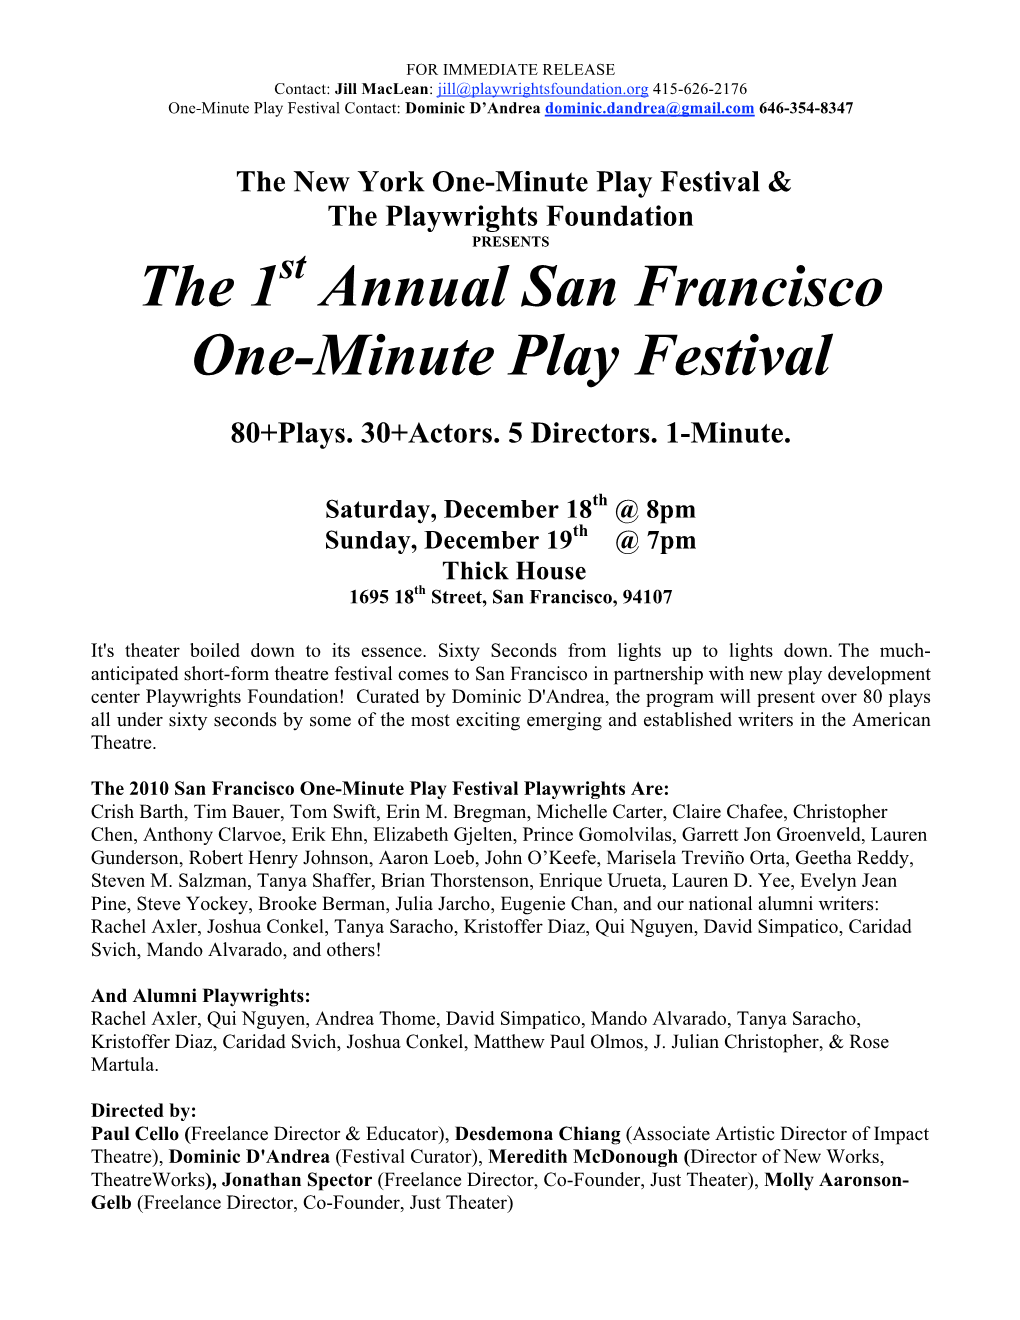 The 1 Annual San Francisco One-Minute Play Festival